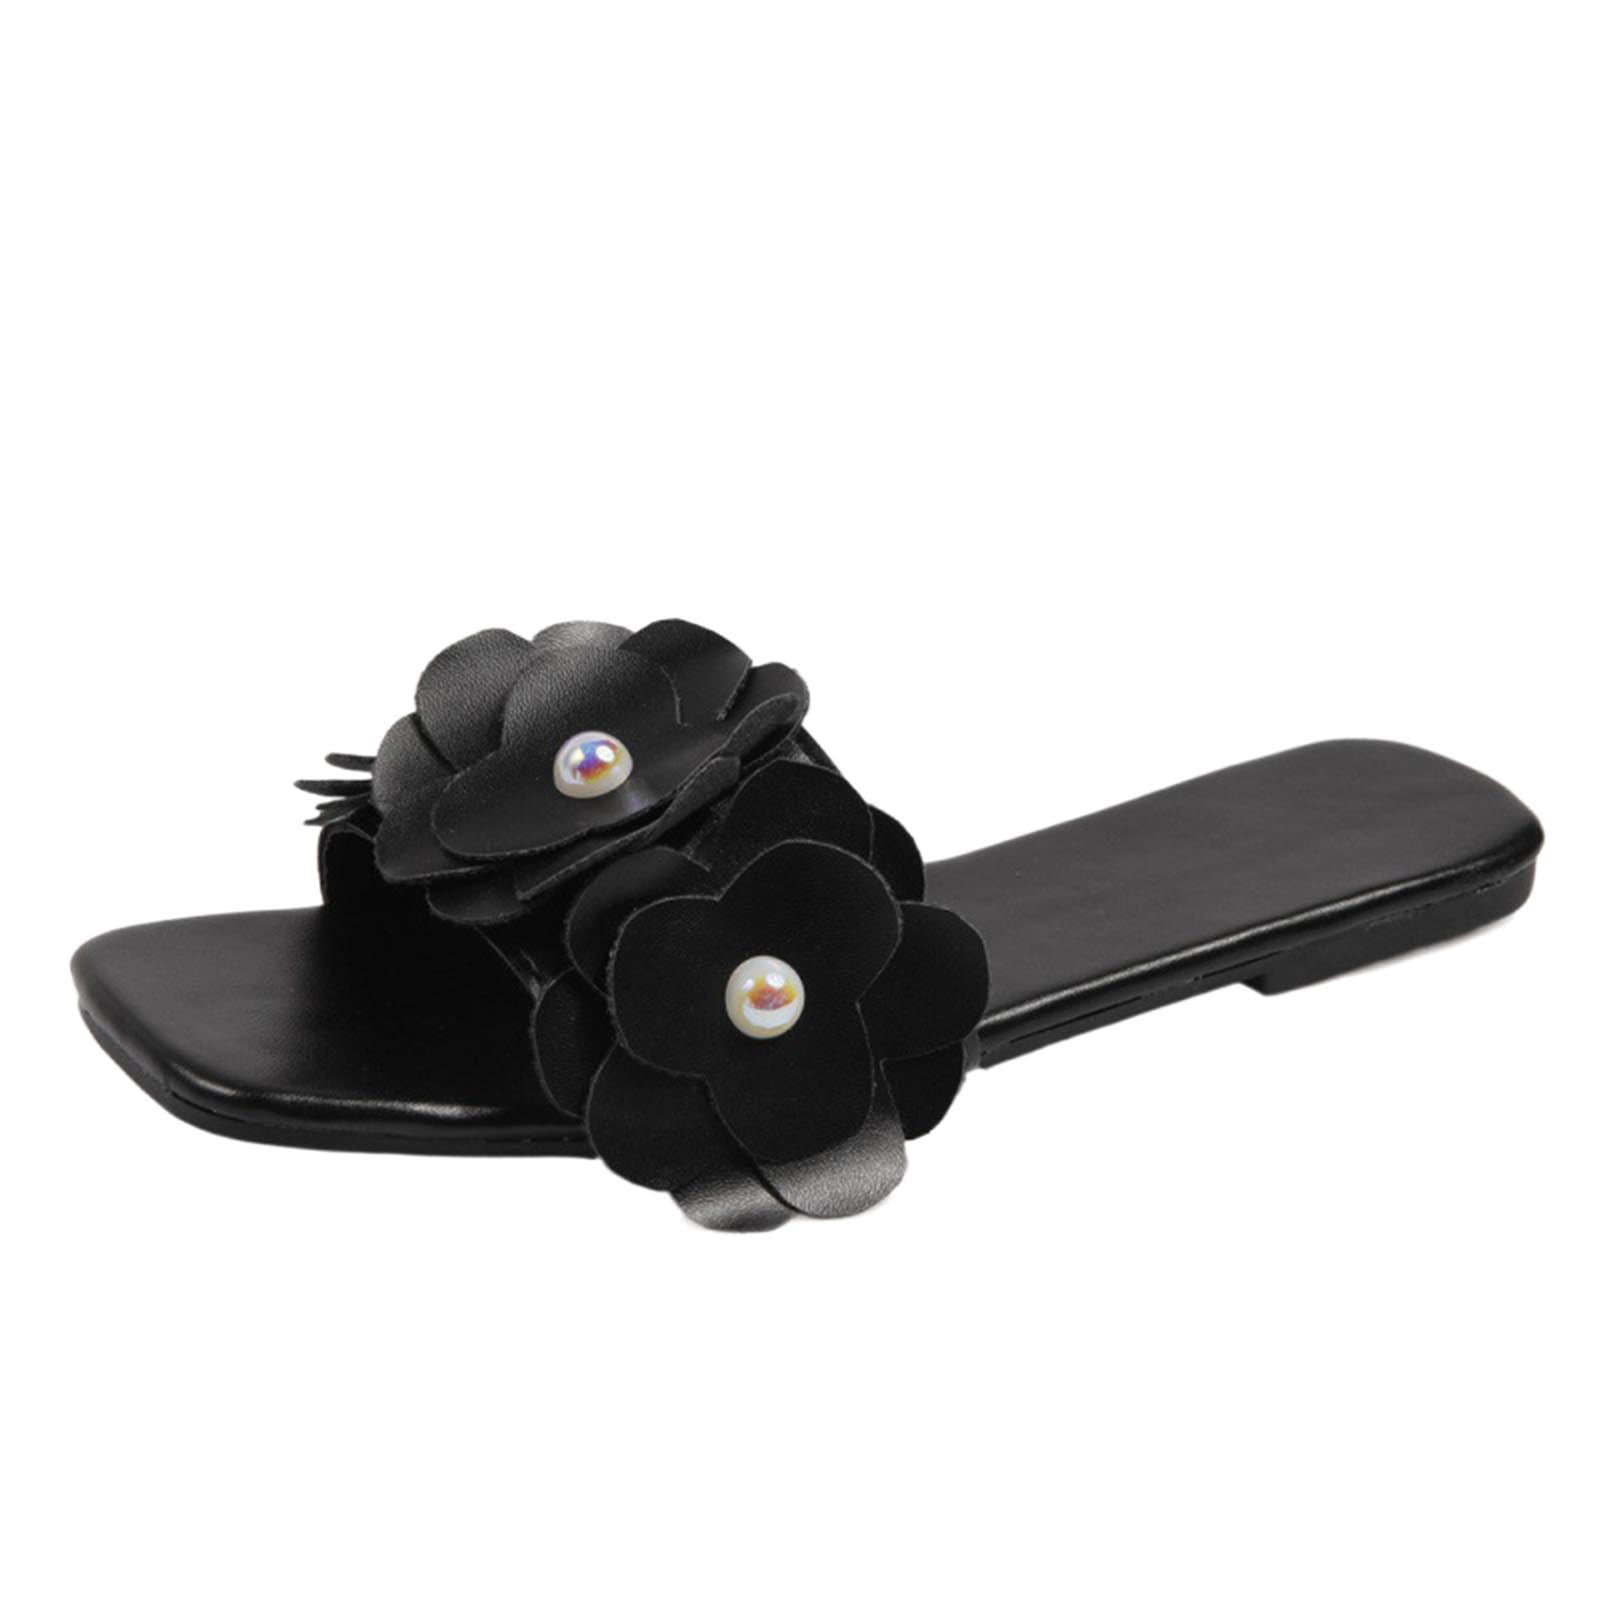 uikmnh Women Slippers Spring And Summer Flower Women Sandals And Slippers  Beach Shoes Pearl Slippers Black 8 